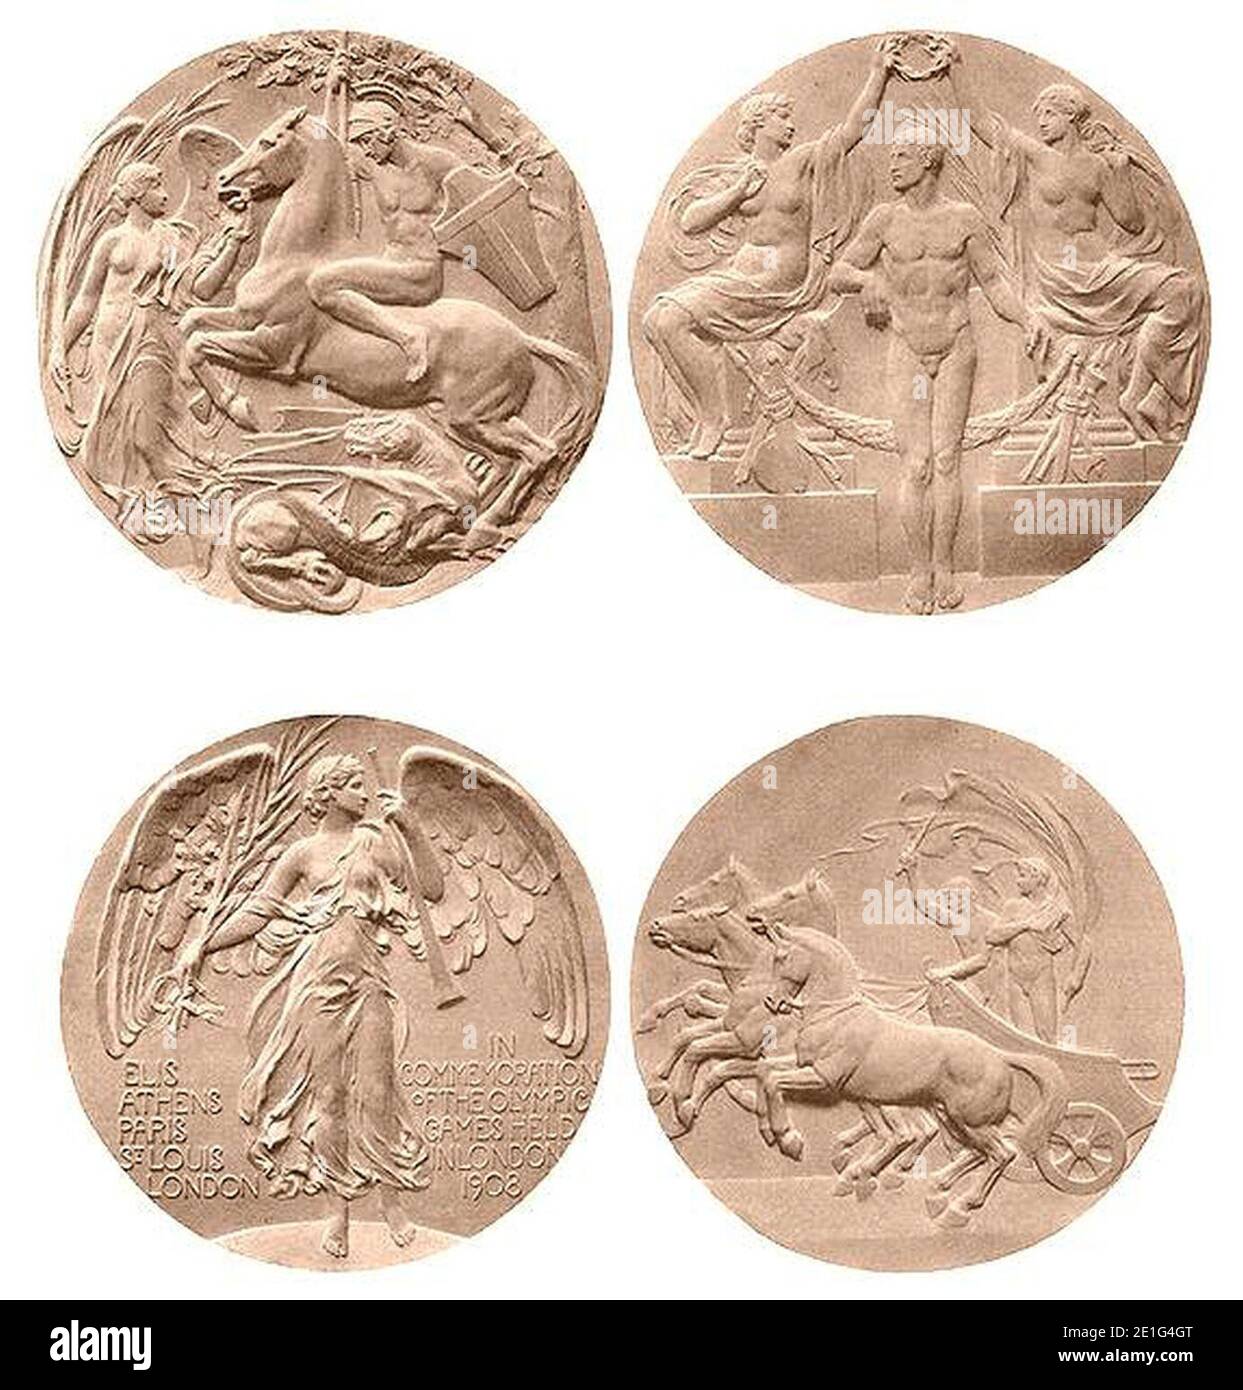 London 1908 Medals. Stock Photo